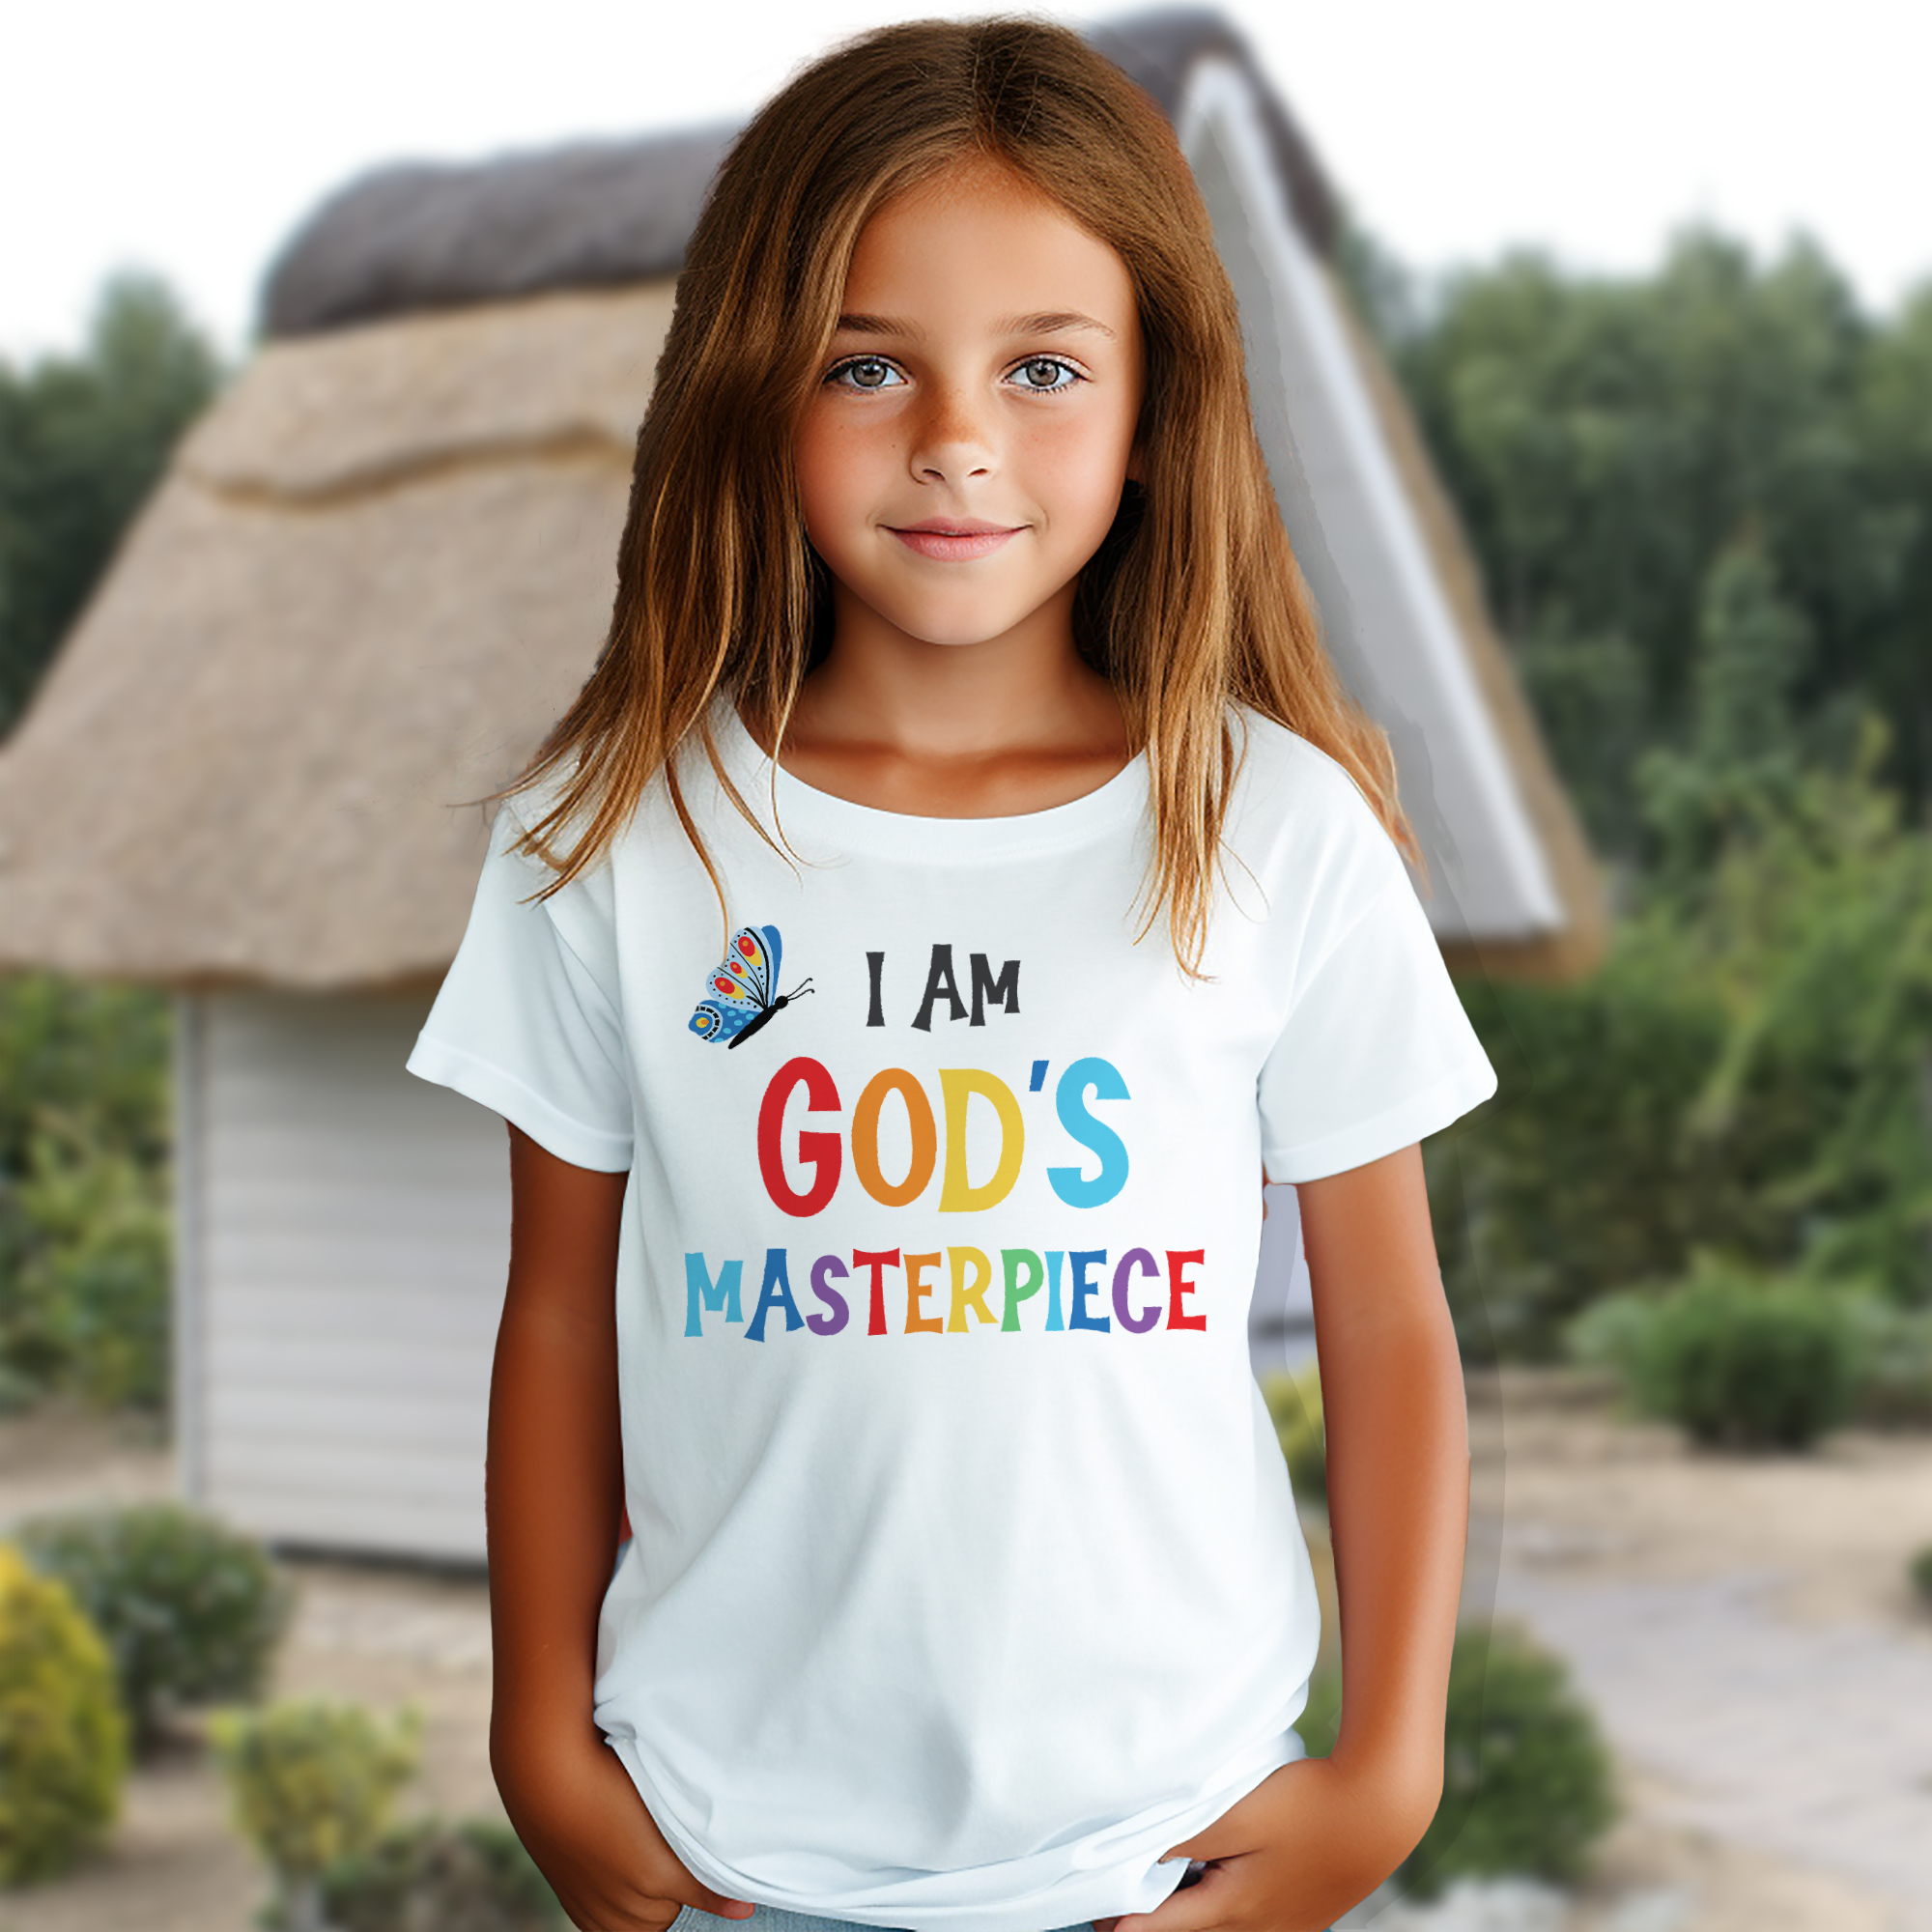 I am Gods Masterpiece Youth Relaxed-Fit T-Shirt Colors: White Sizes: S Jesus Passion Apparel